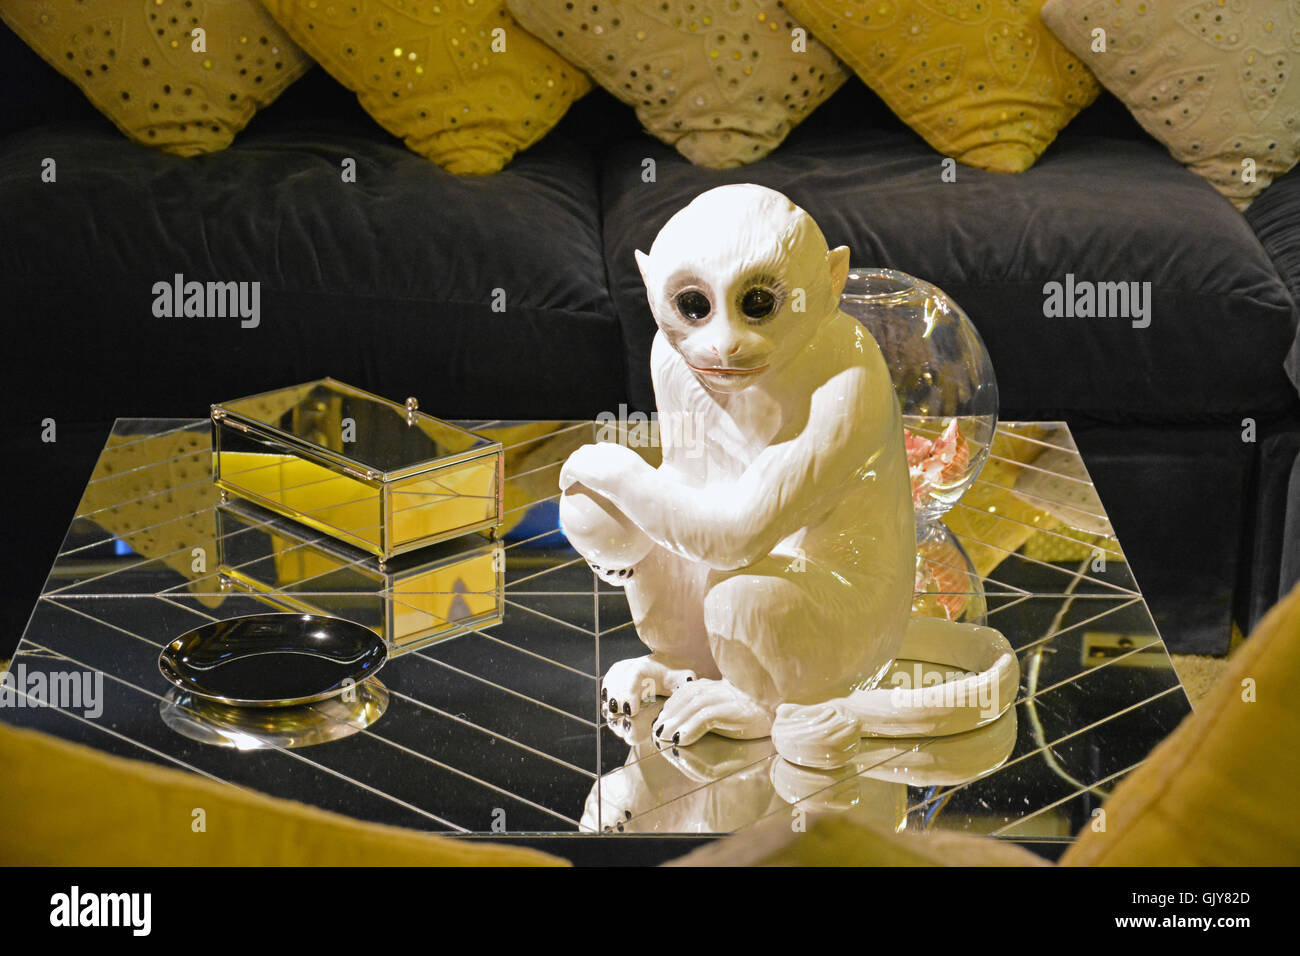 A slightly creepy ceramic monkey on a mirrored table in the media room at Elvis Presley's Graceland home and museum in Memphis. Stock Photo